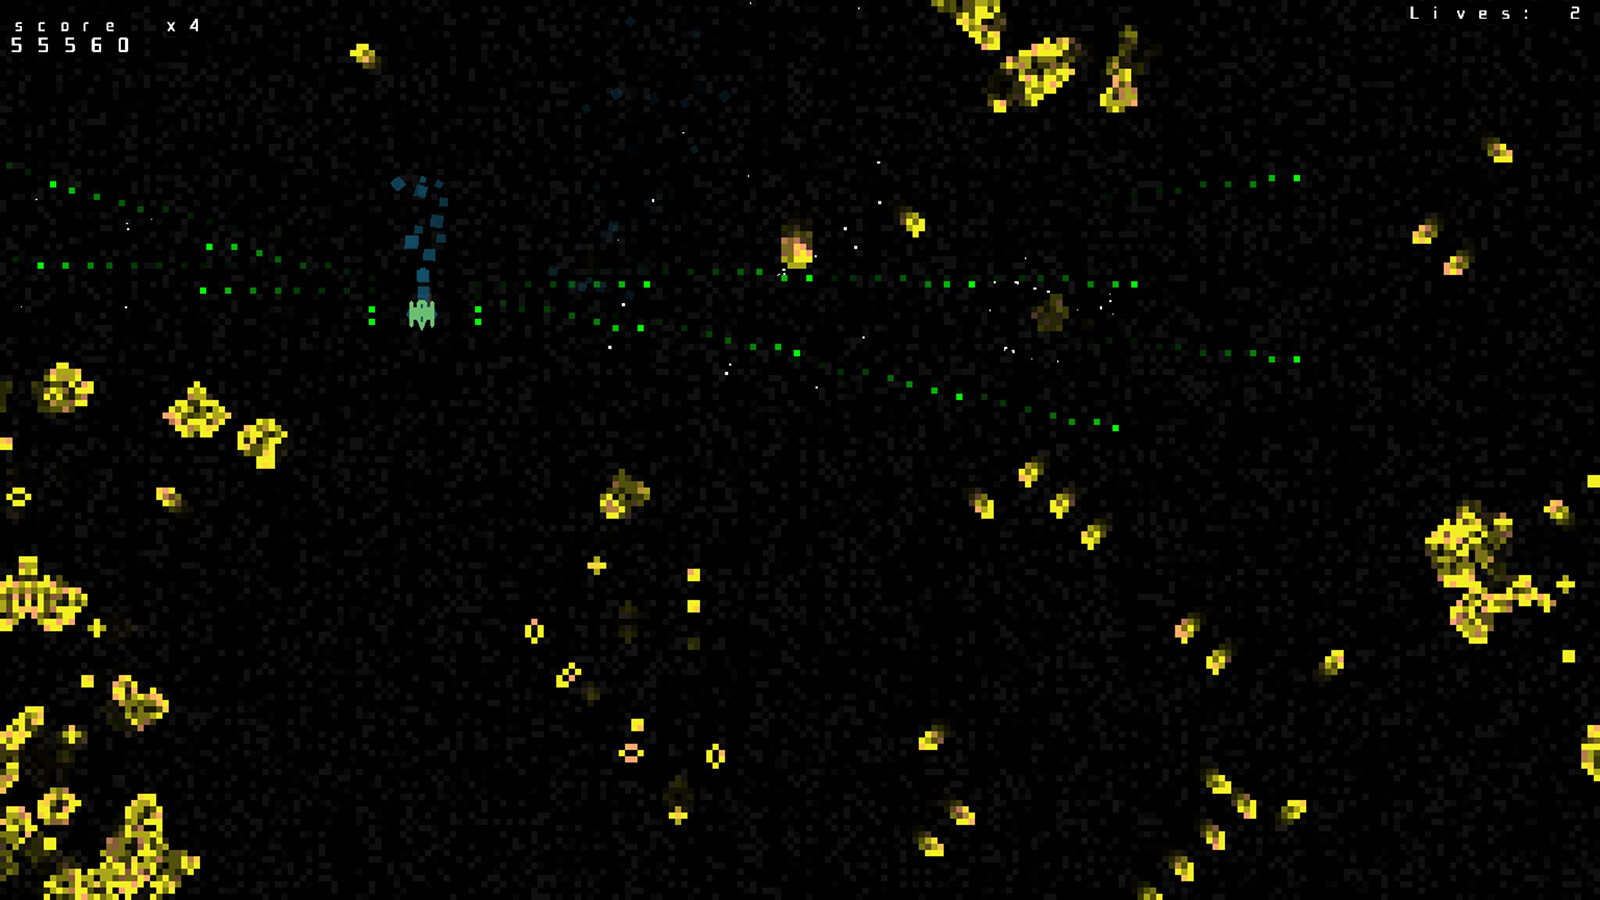 A pixellated spaceship shoots in two directions at clusters of enemy cells.